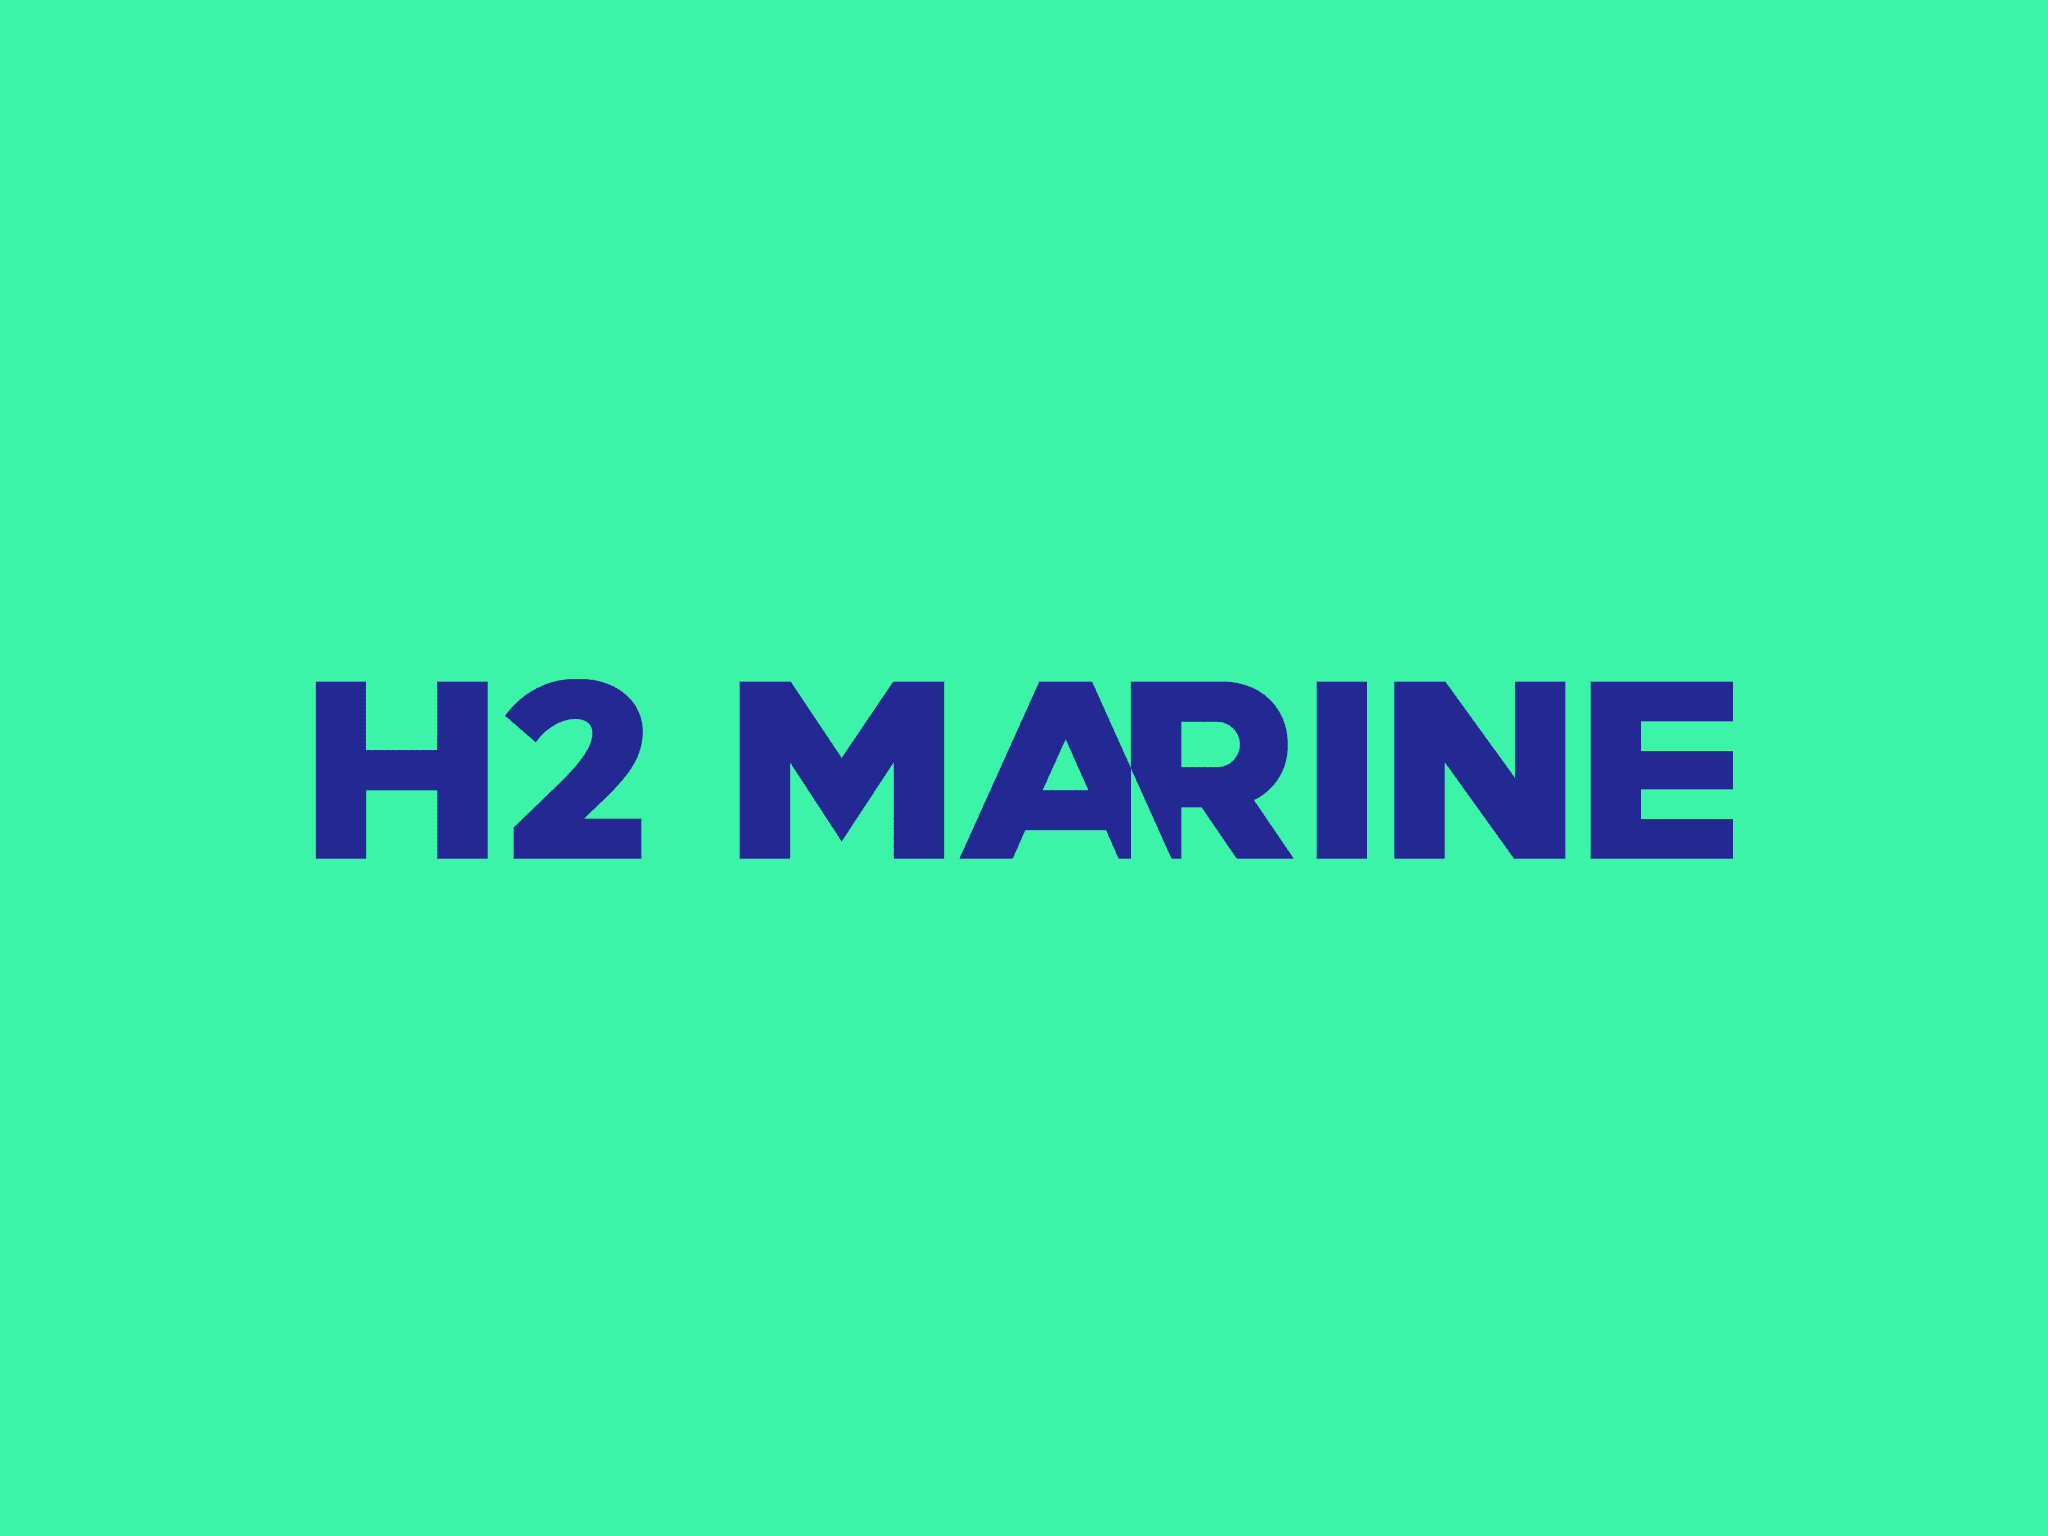 H2 Marine - Producer and distributor of green hydrogen and oxygen for maritime users.